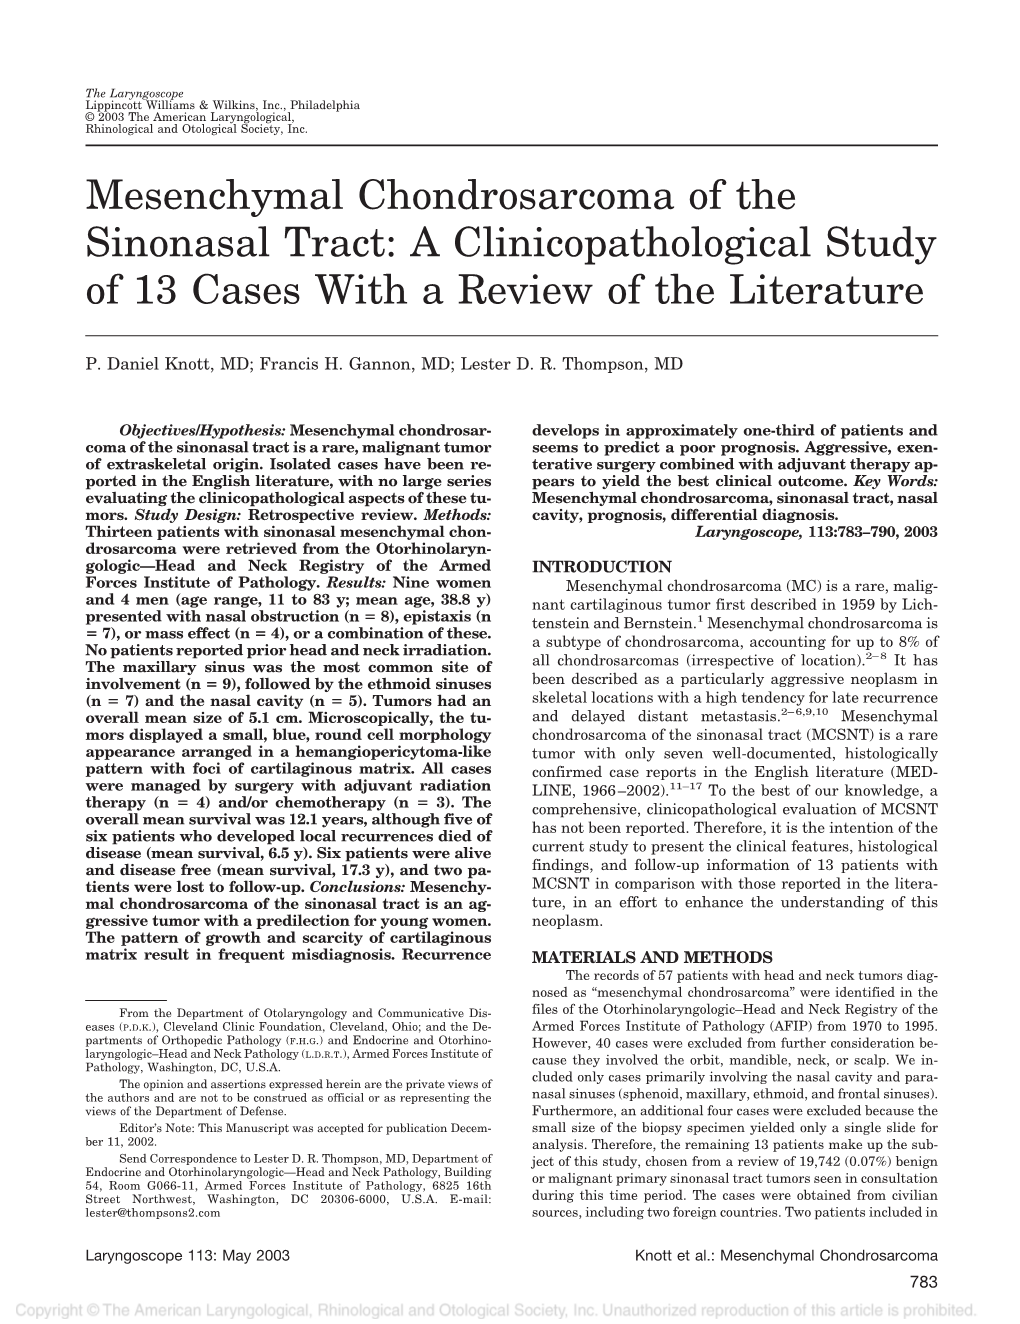 Mesenchymal Chondrosarcoma of the Sinonasal Tract: a Clinicopathological Study of 13 Cases with a Review of the Literature